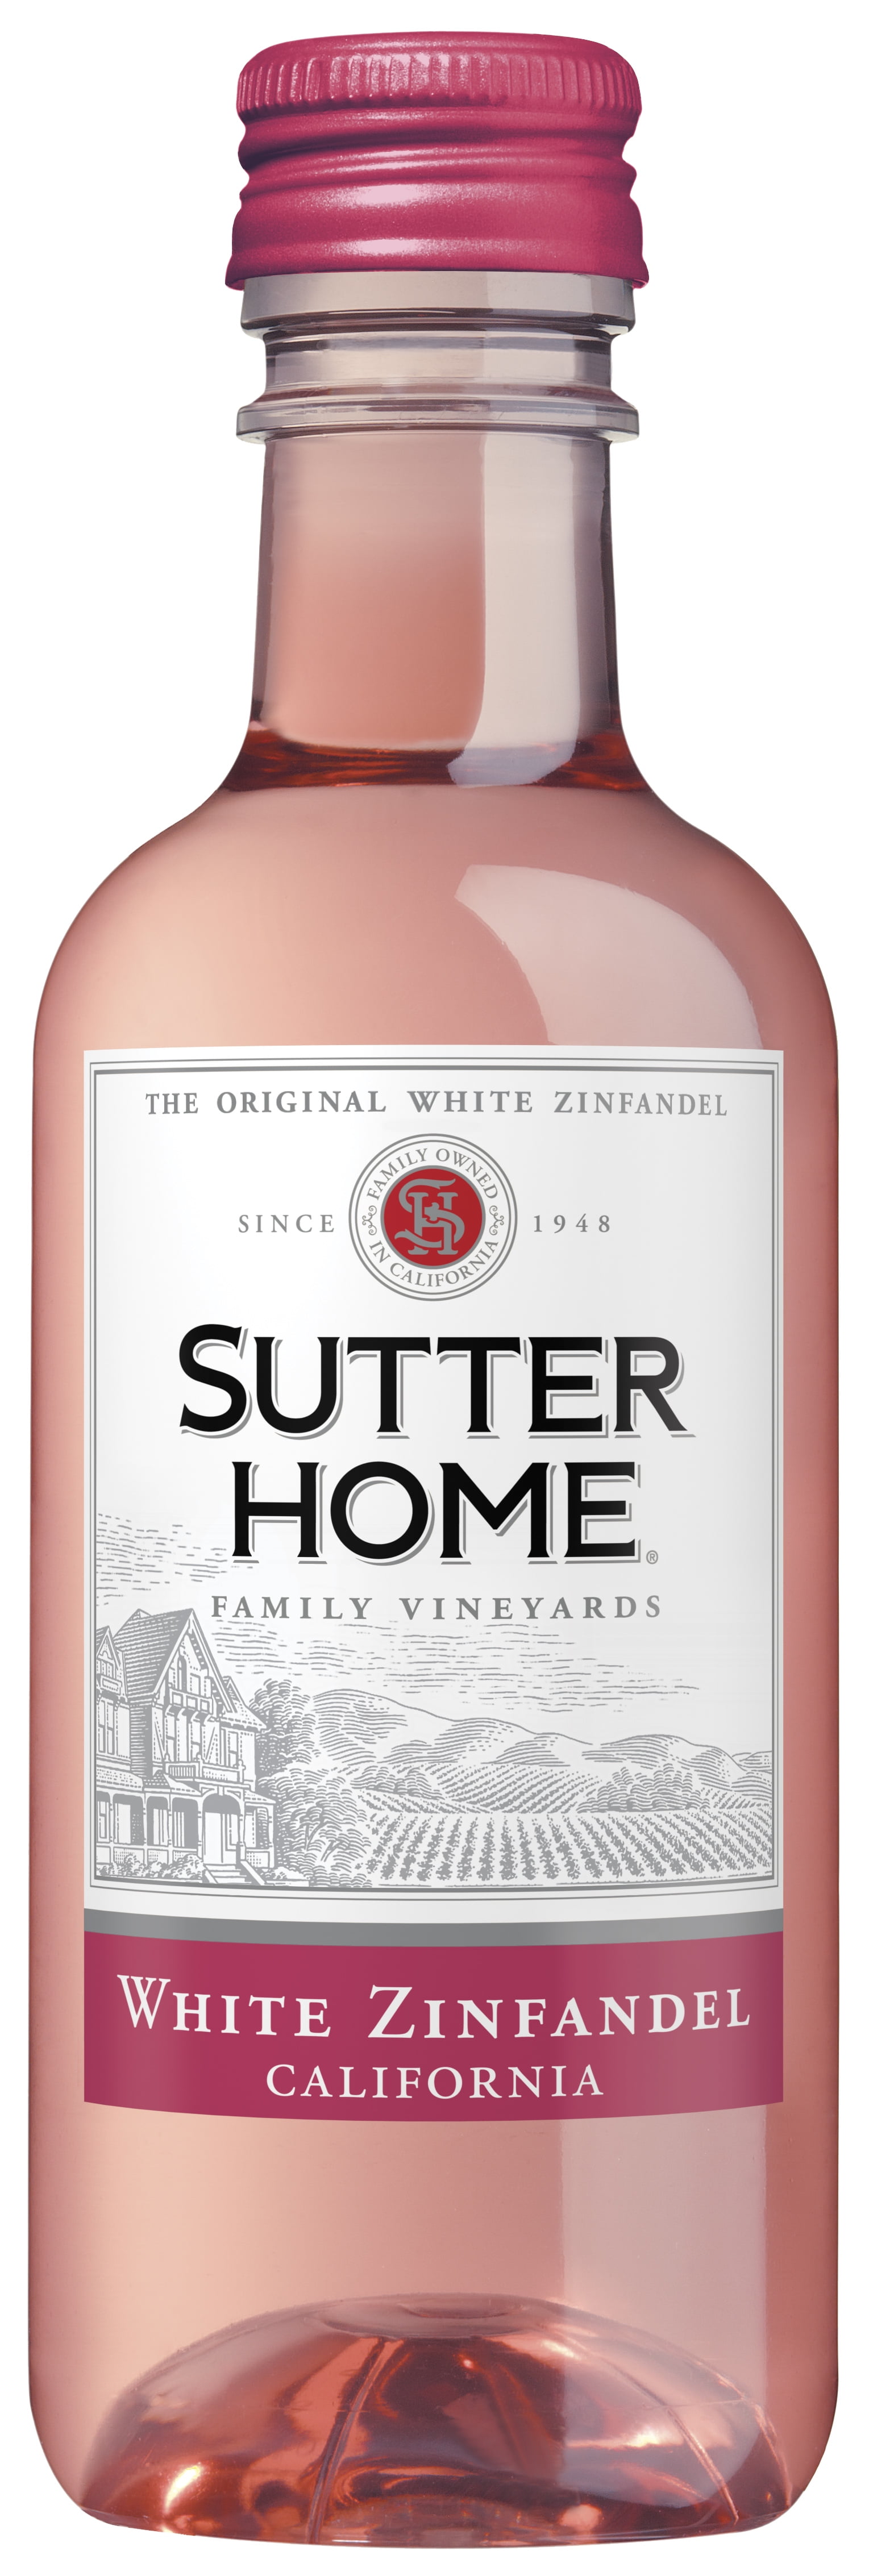 Sutter Home Mini Wine Bottles 4 Pack Price Best Pictures